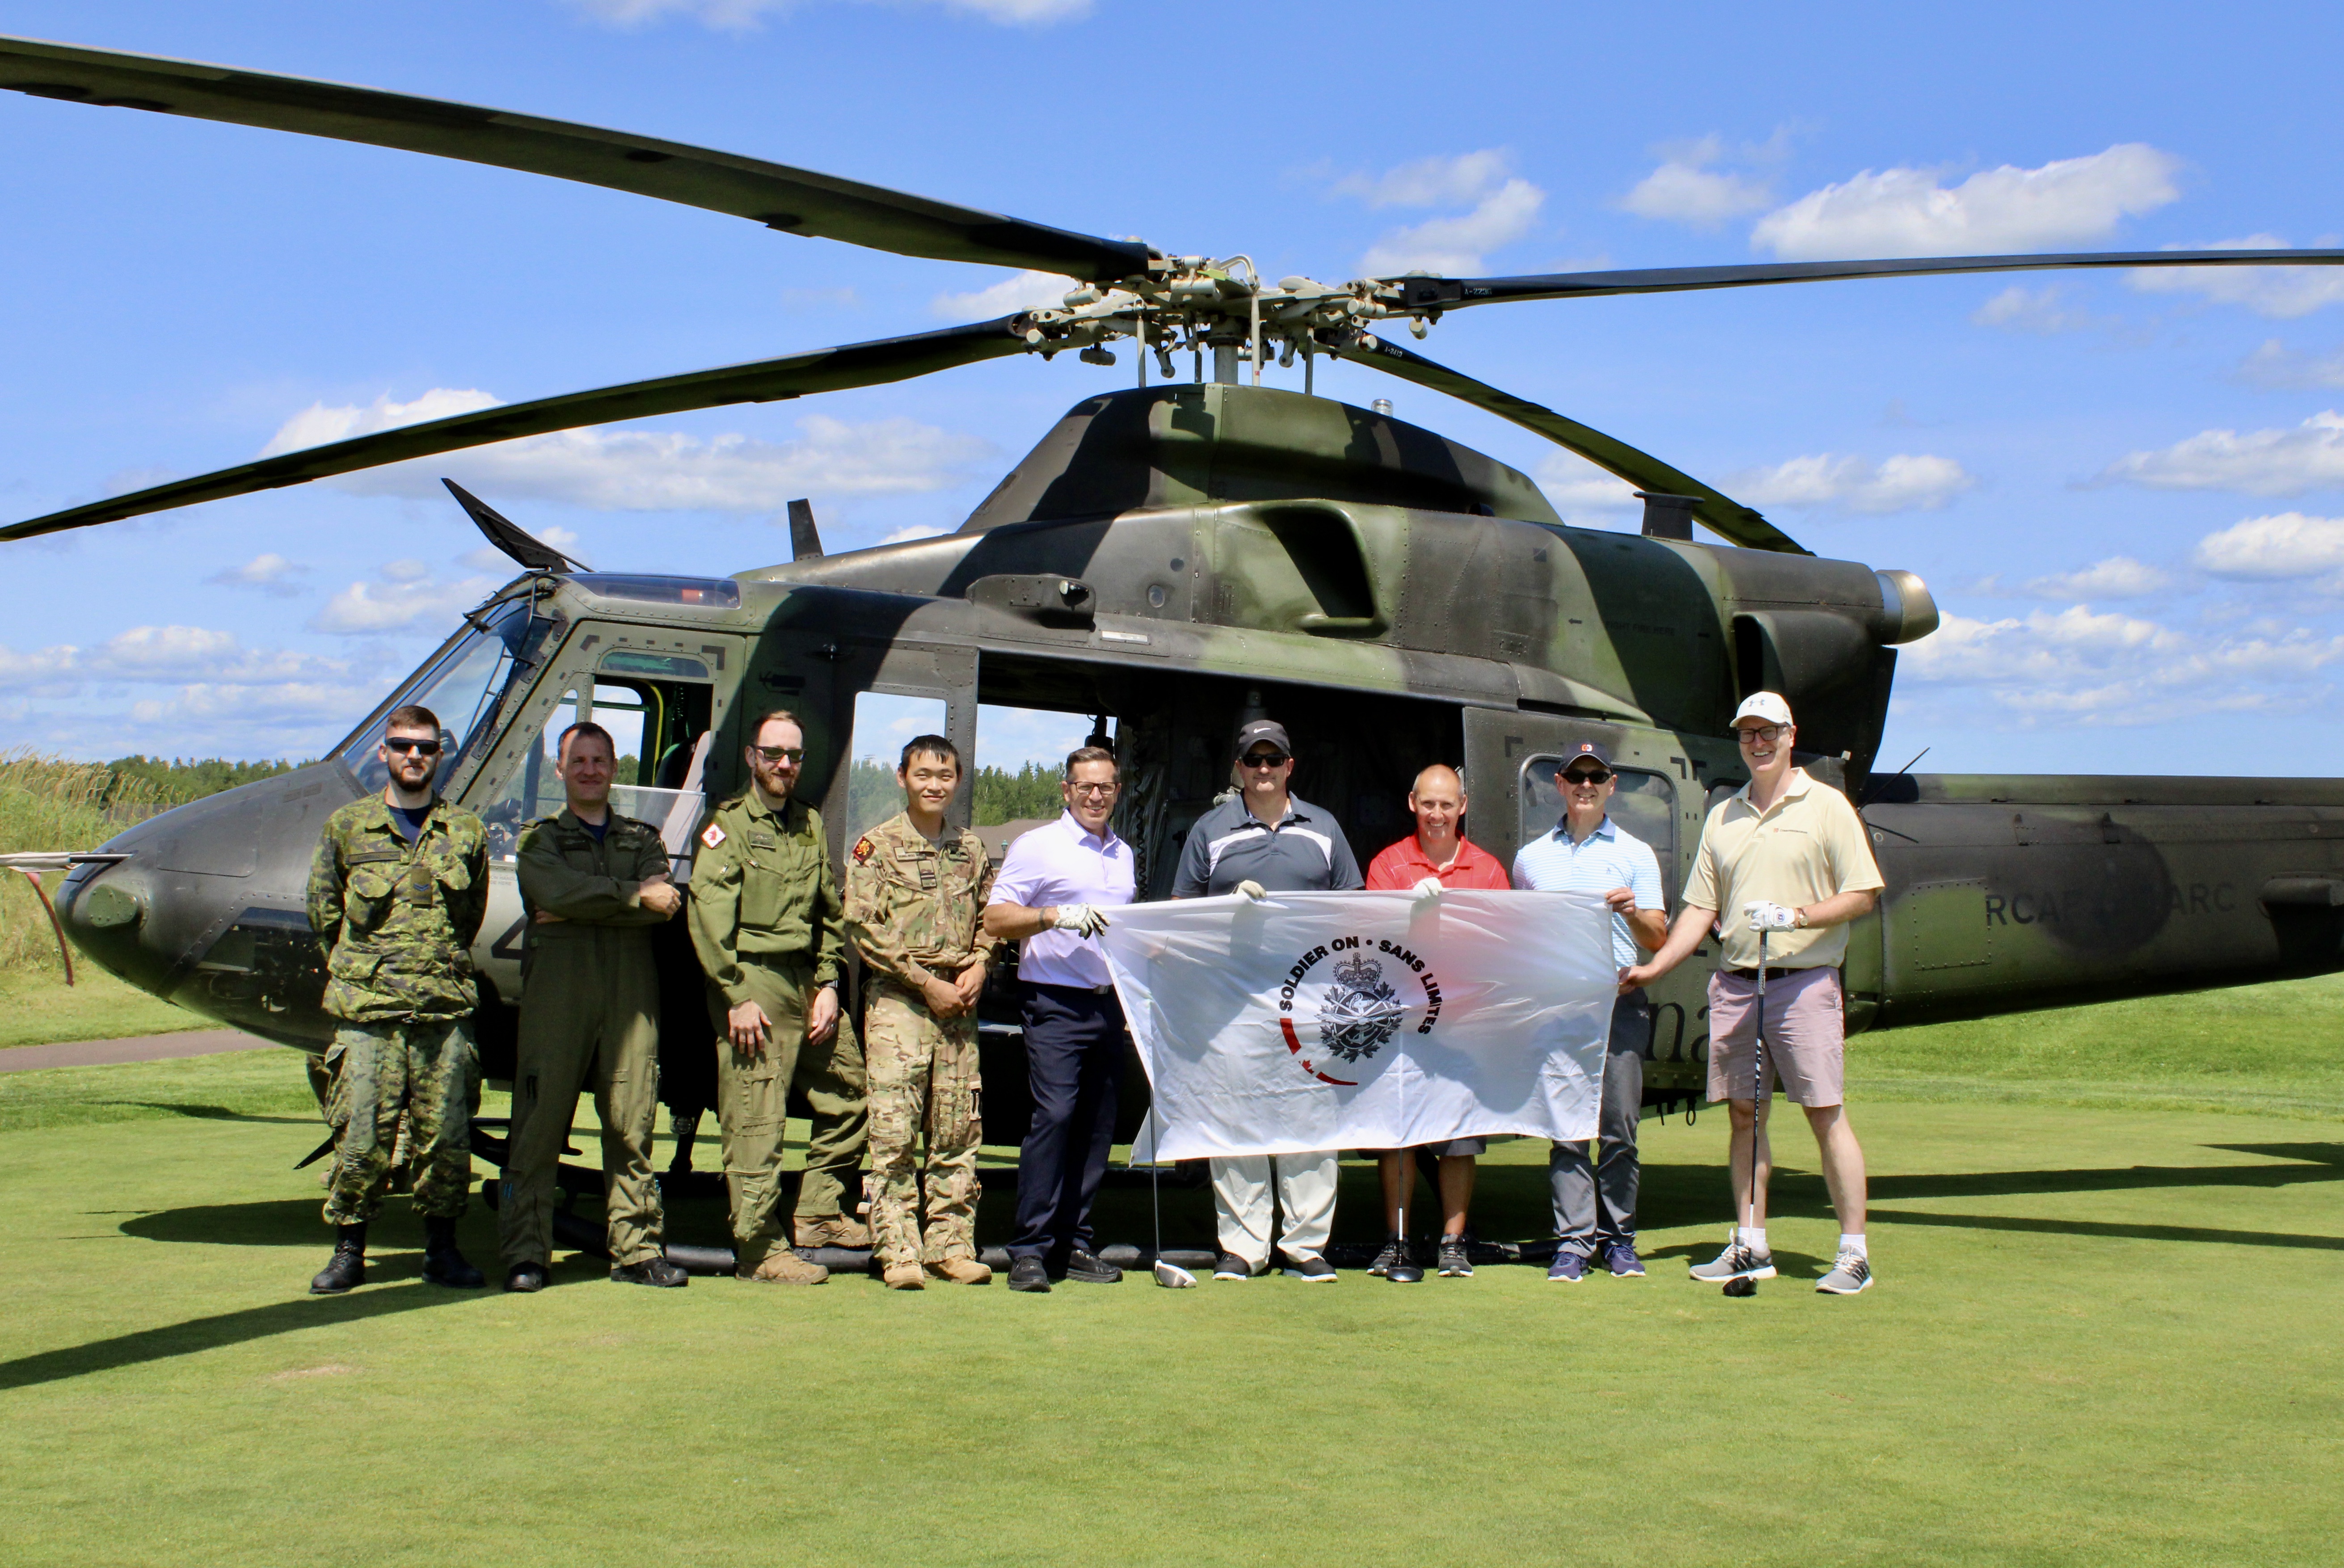 Helicopter group photo